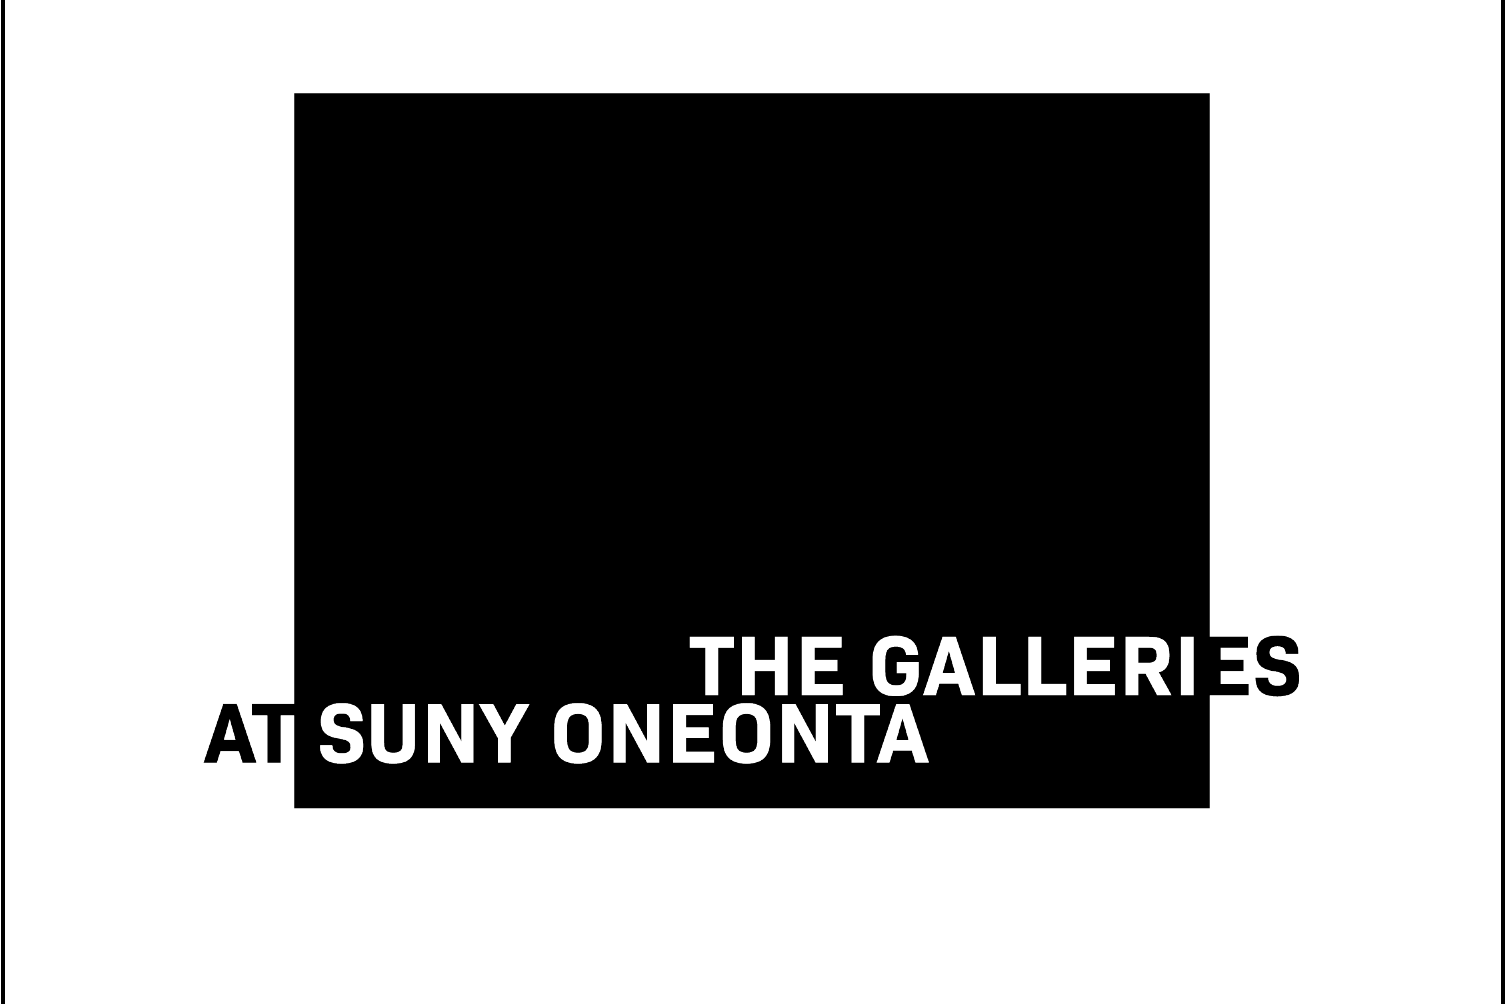 The Galleries at SUNY Oneonta: Excellence in New Media